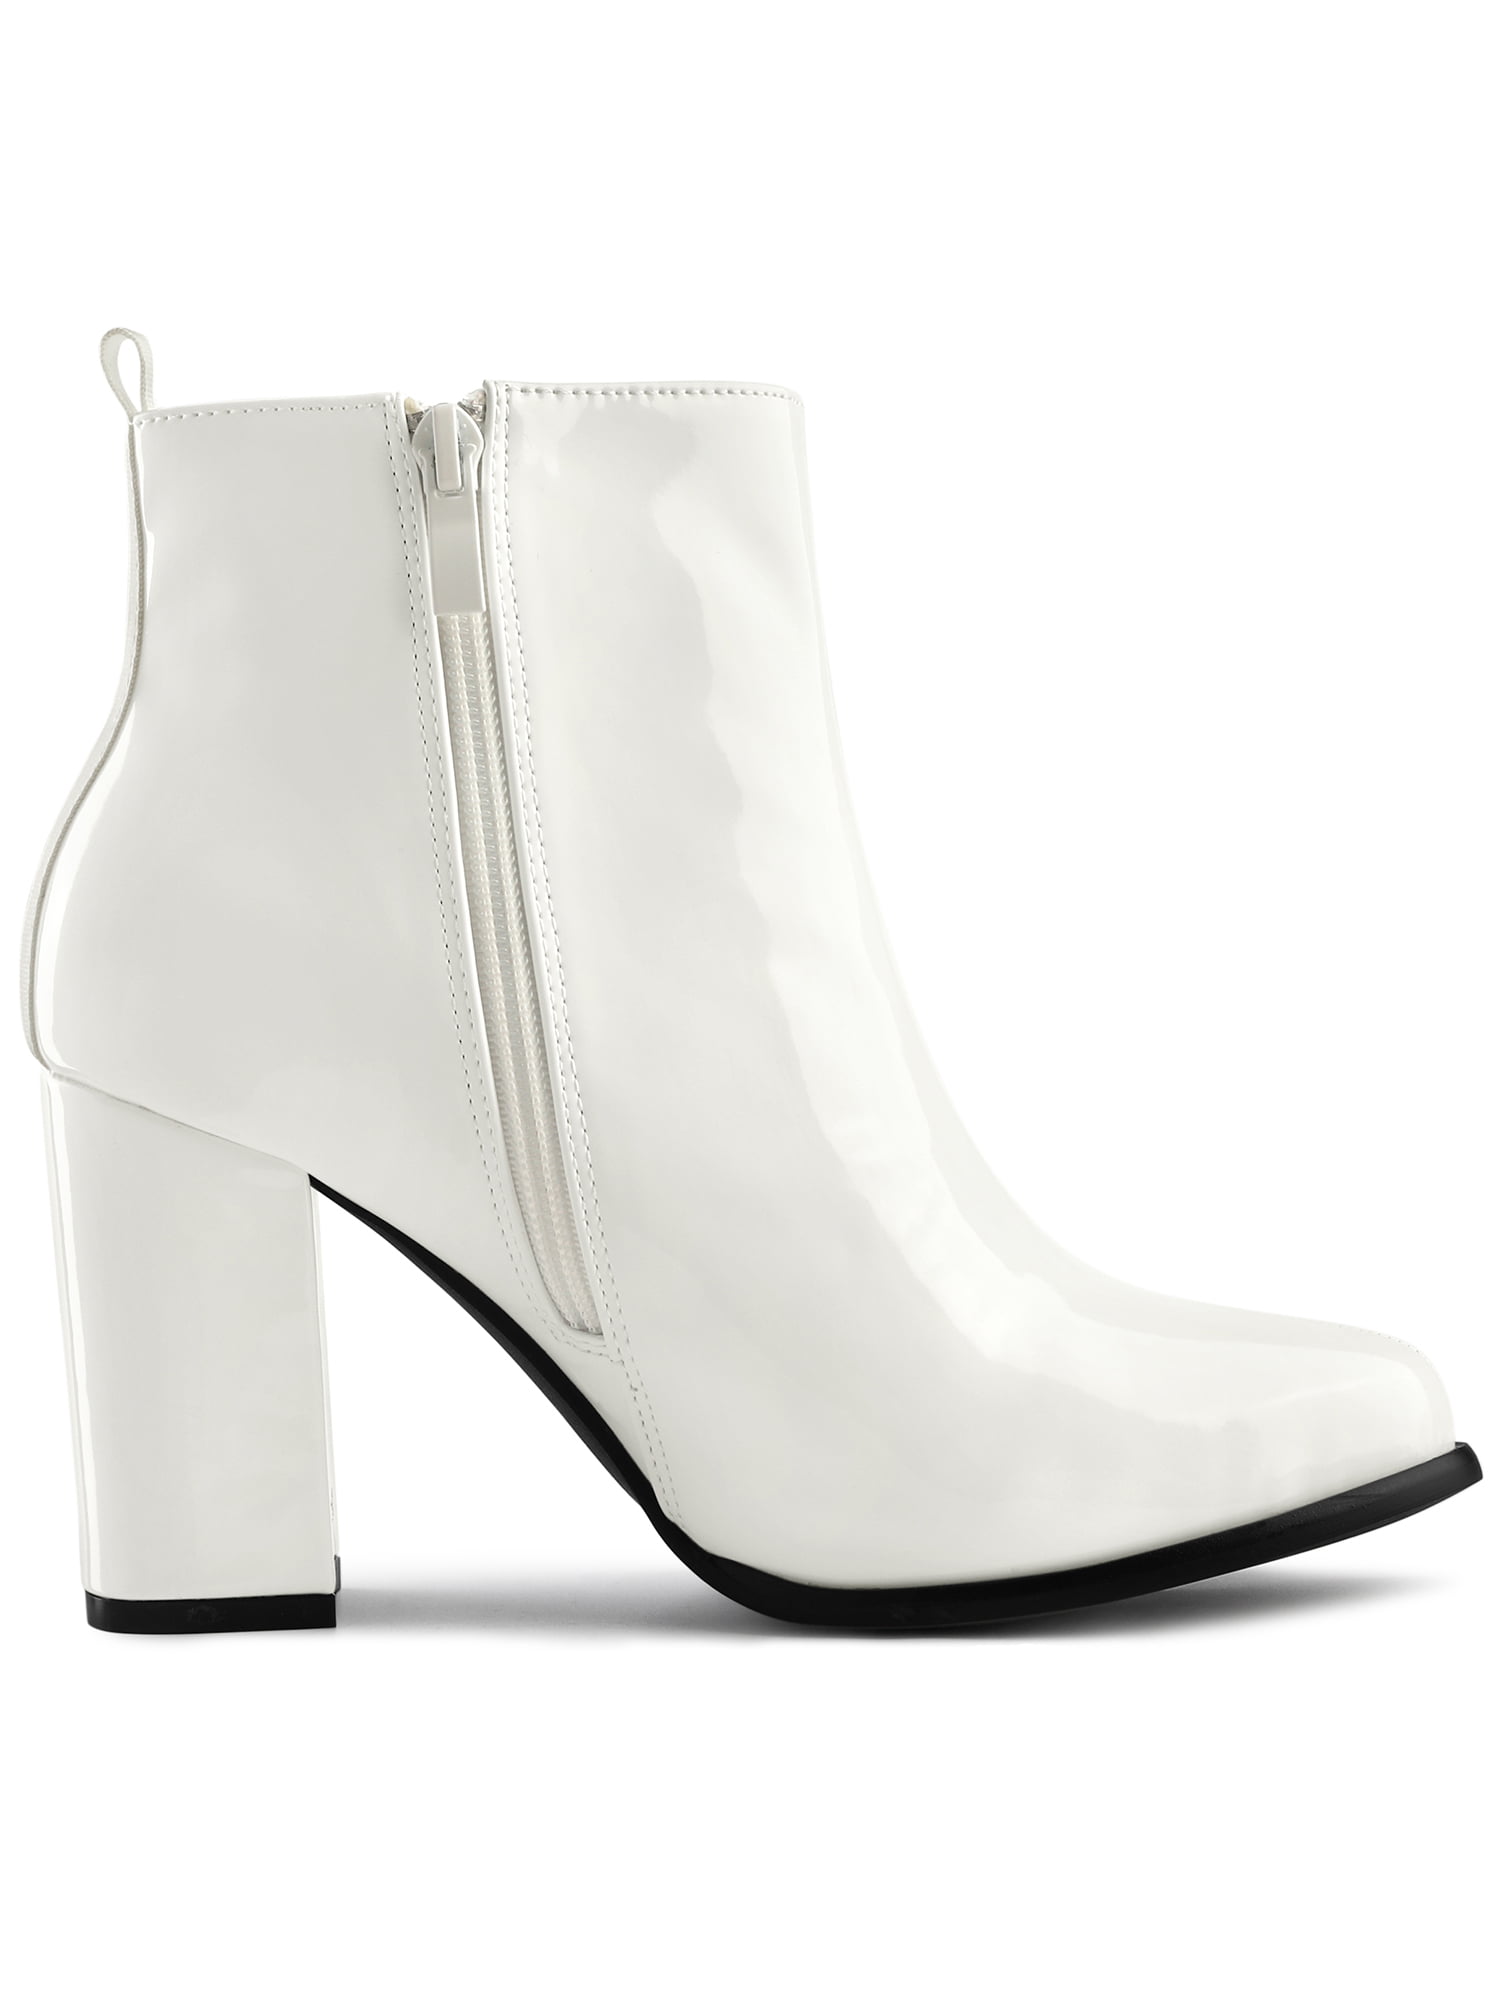 Amazon.com | JustFab Rosamund Block Heeled Booties for Women - White Ankle  Boots, Faux Leather High Heel Booties, White Boots for Women, Womens Boots, Chunky  Heeled Boots | Ankle & Bootie